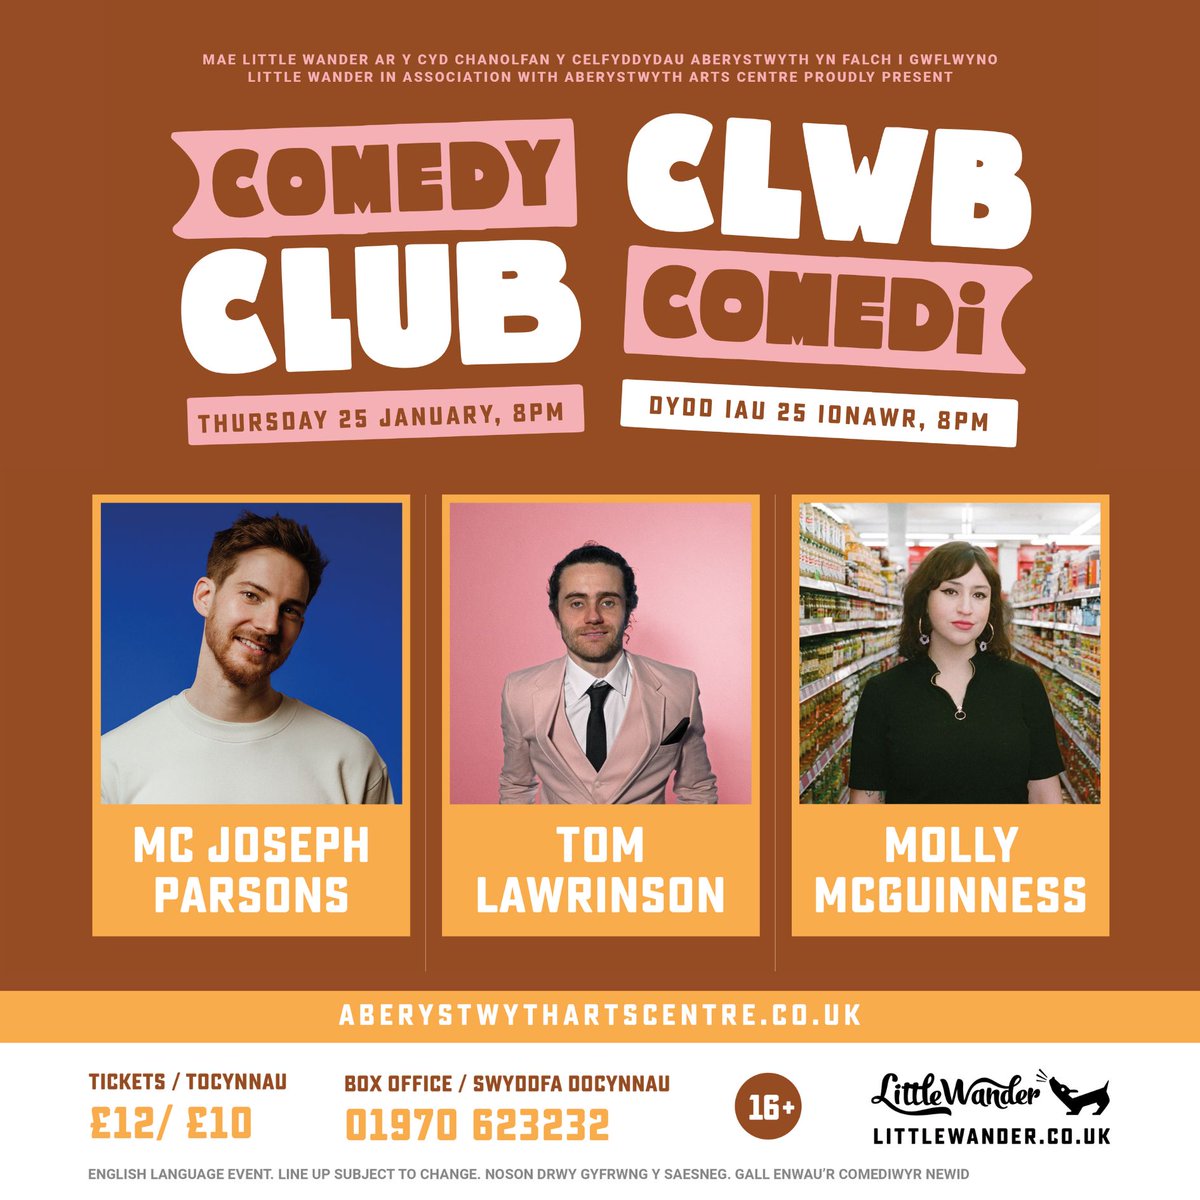 No need to worry about the January blues with our club lineups next month! @StratfordPlays hosts @abicartersimps, @philcomedy & @RuniTalwar @tal.davies, @SamNicoresti & @robertdcopland hit @Pontiotweets @AberystwythArts hosts @TomLawrinson @mollmcguinness @JosephParsonsha